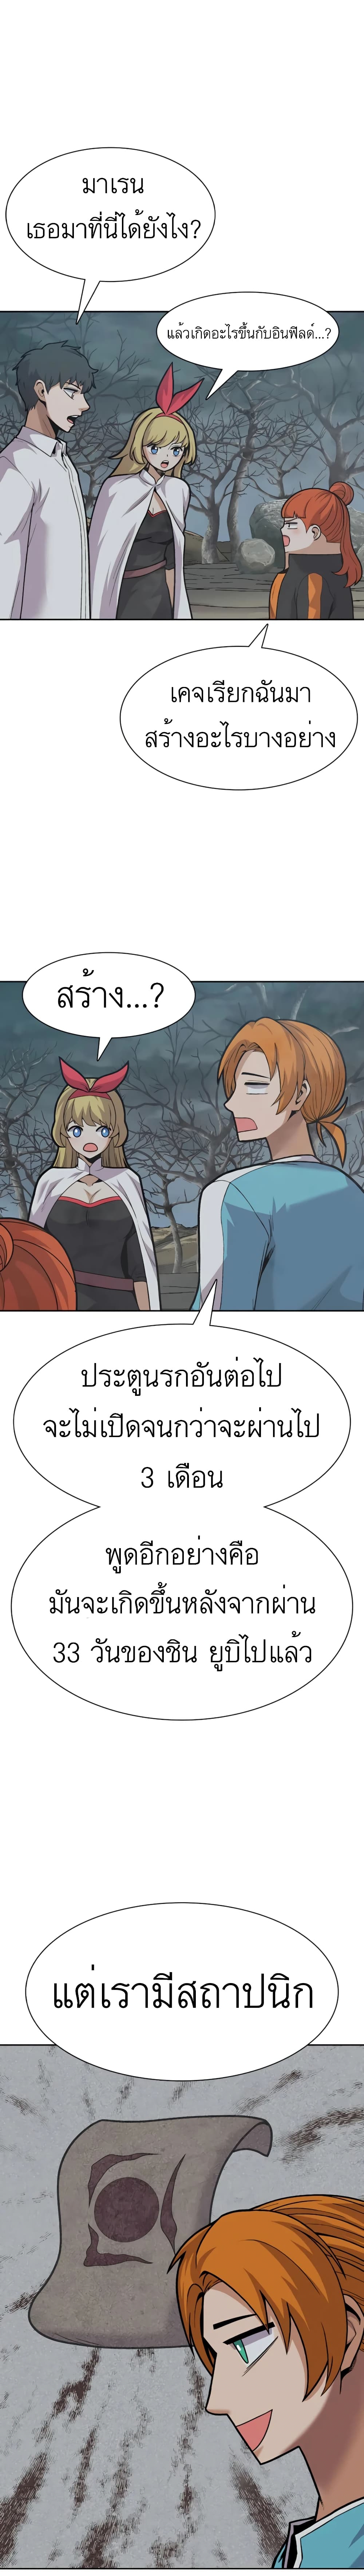 Raising Newbie Heroes In Another World ตอนที่ 23 (22)